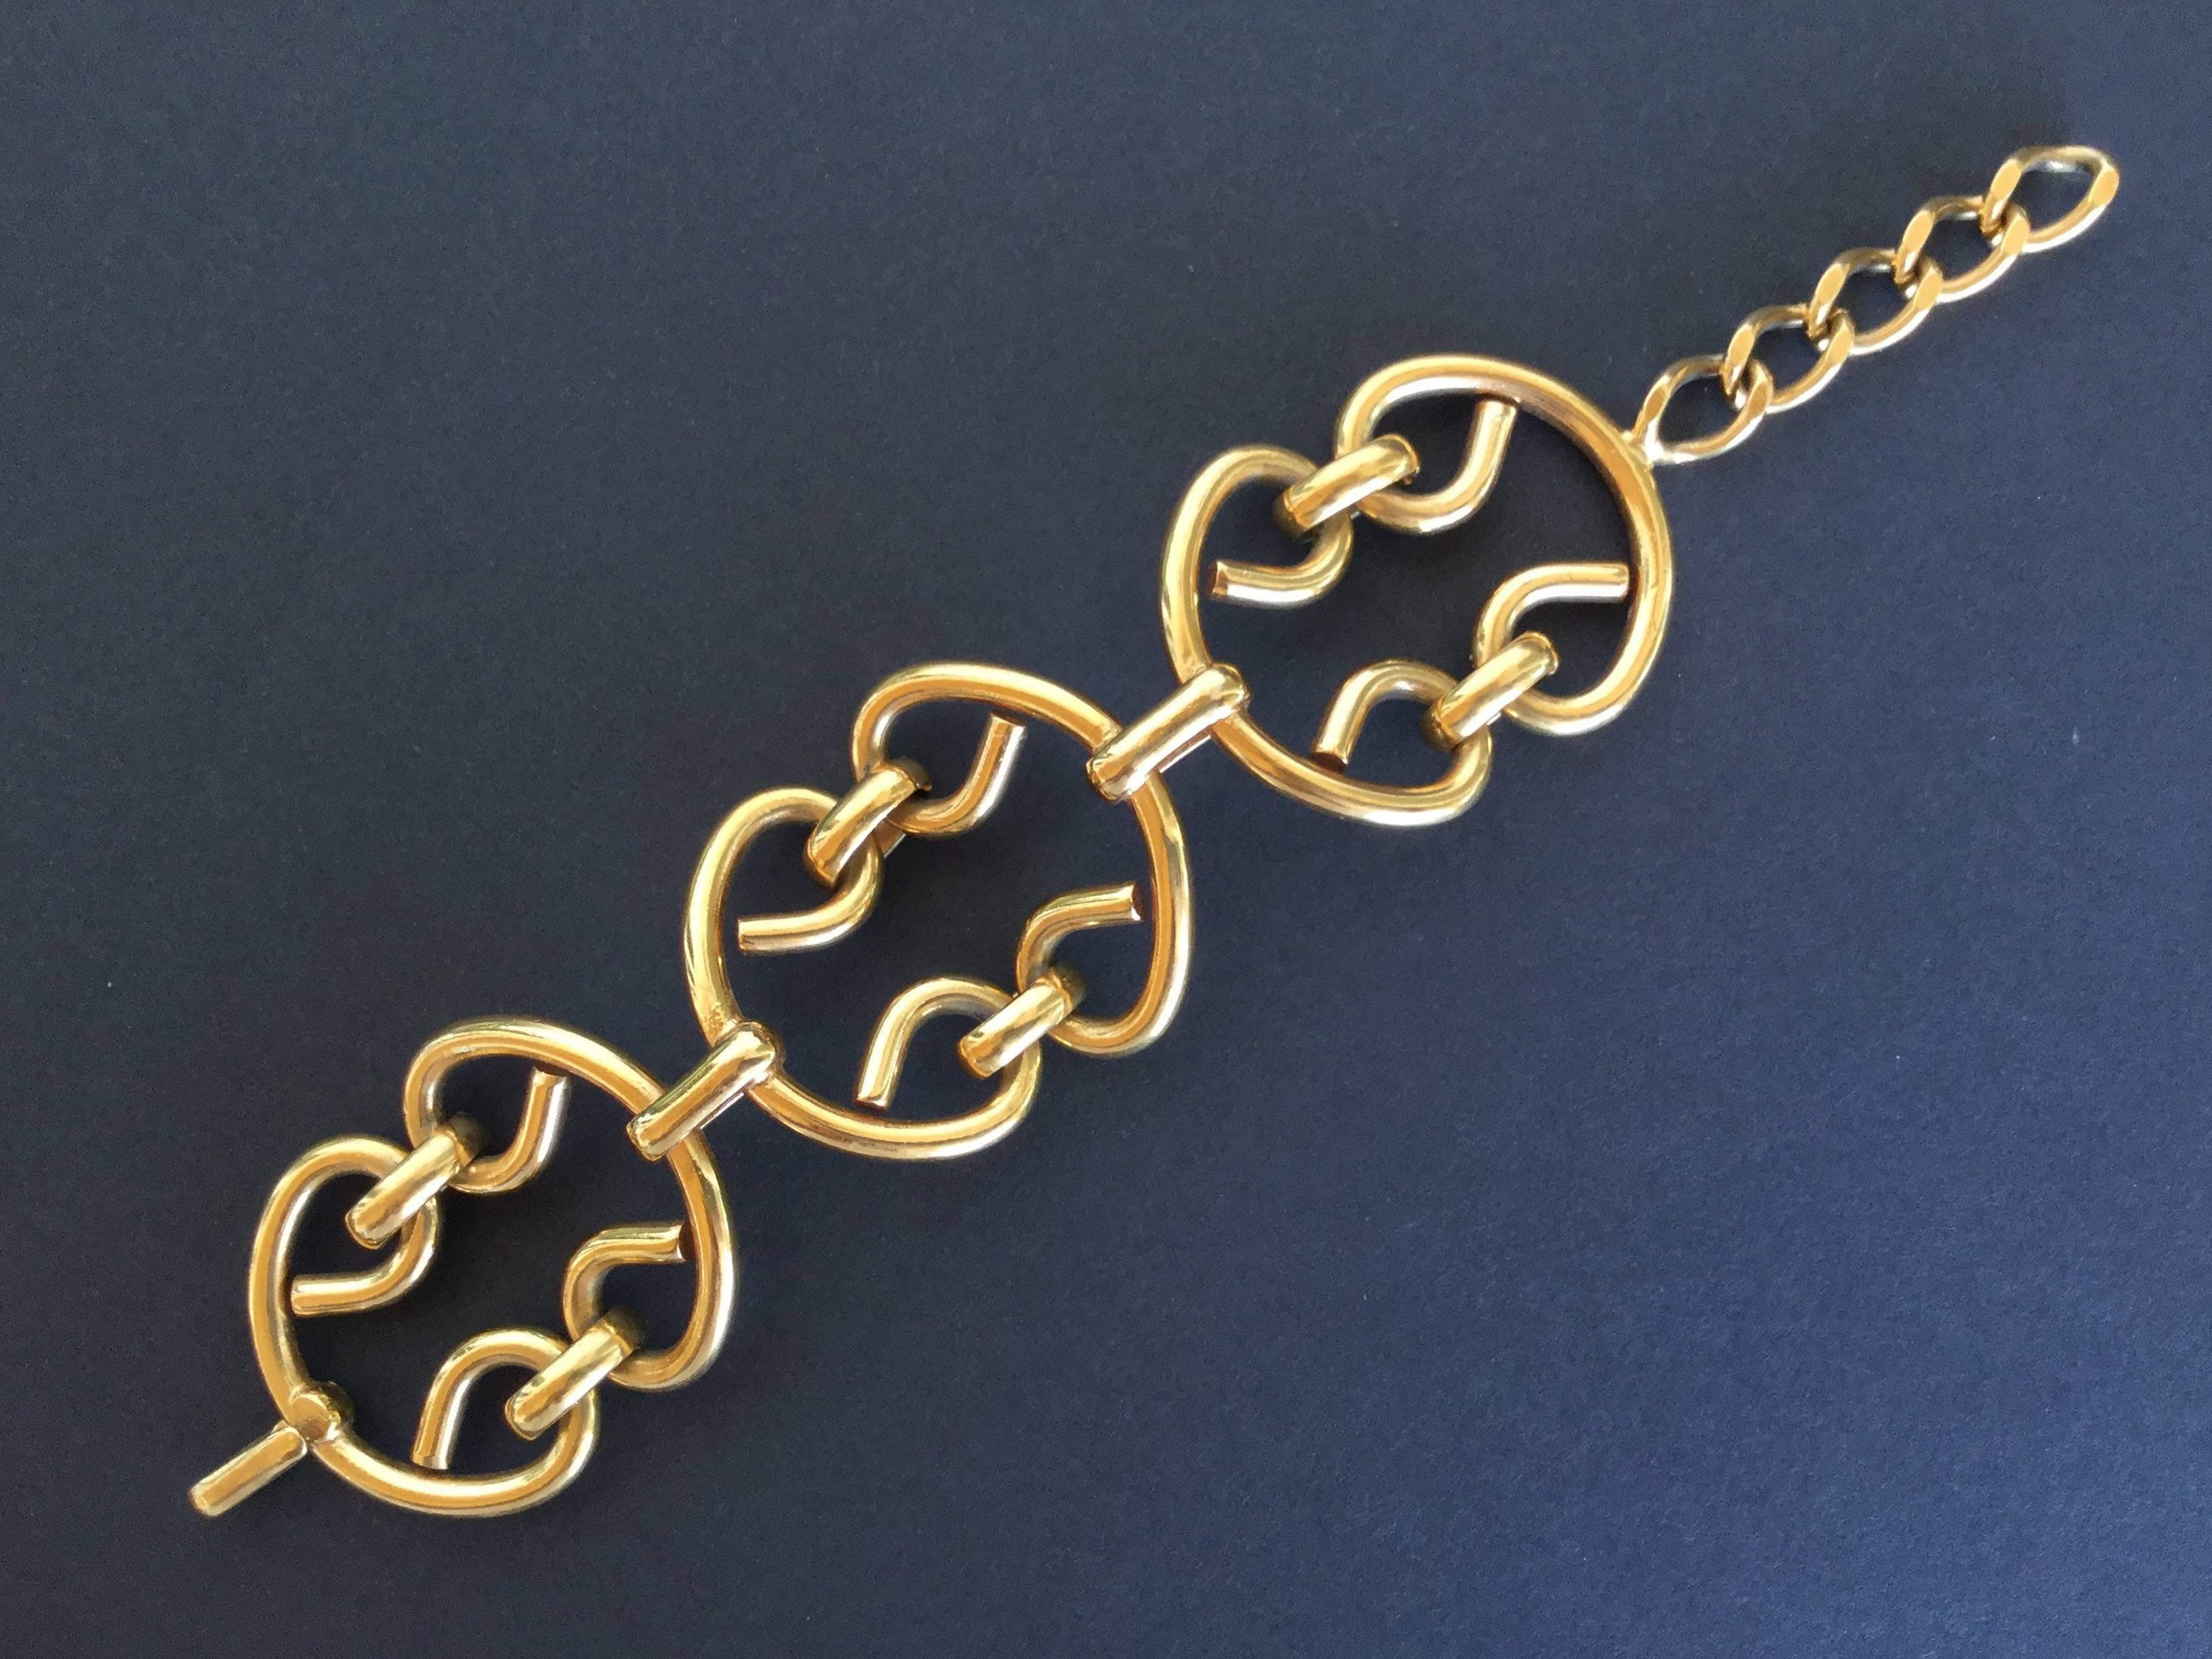 These older Chanel pieces just feel nothing like the newer ones! This gilt link bracelet is so solid and heavy. The gilding is quiet and restrained. Burnished instead of flashy like newer pieces can be. Simple but striking design dating from the